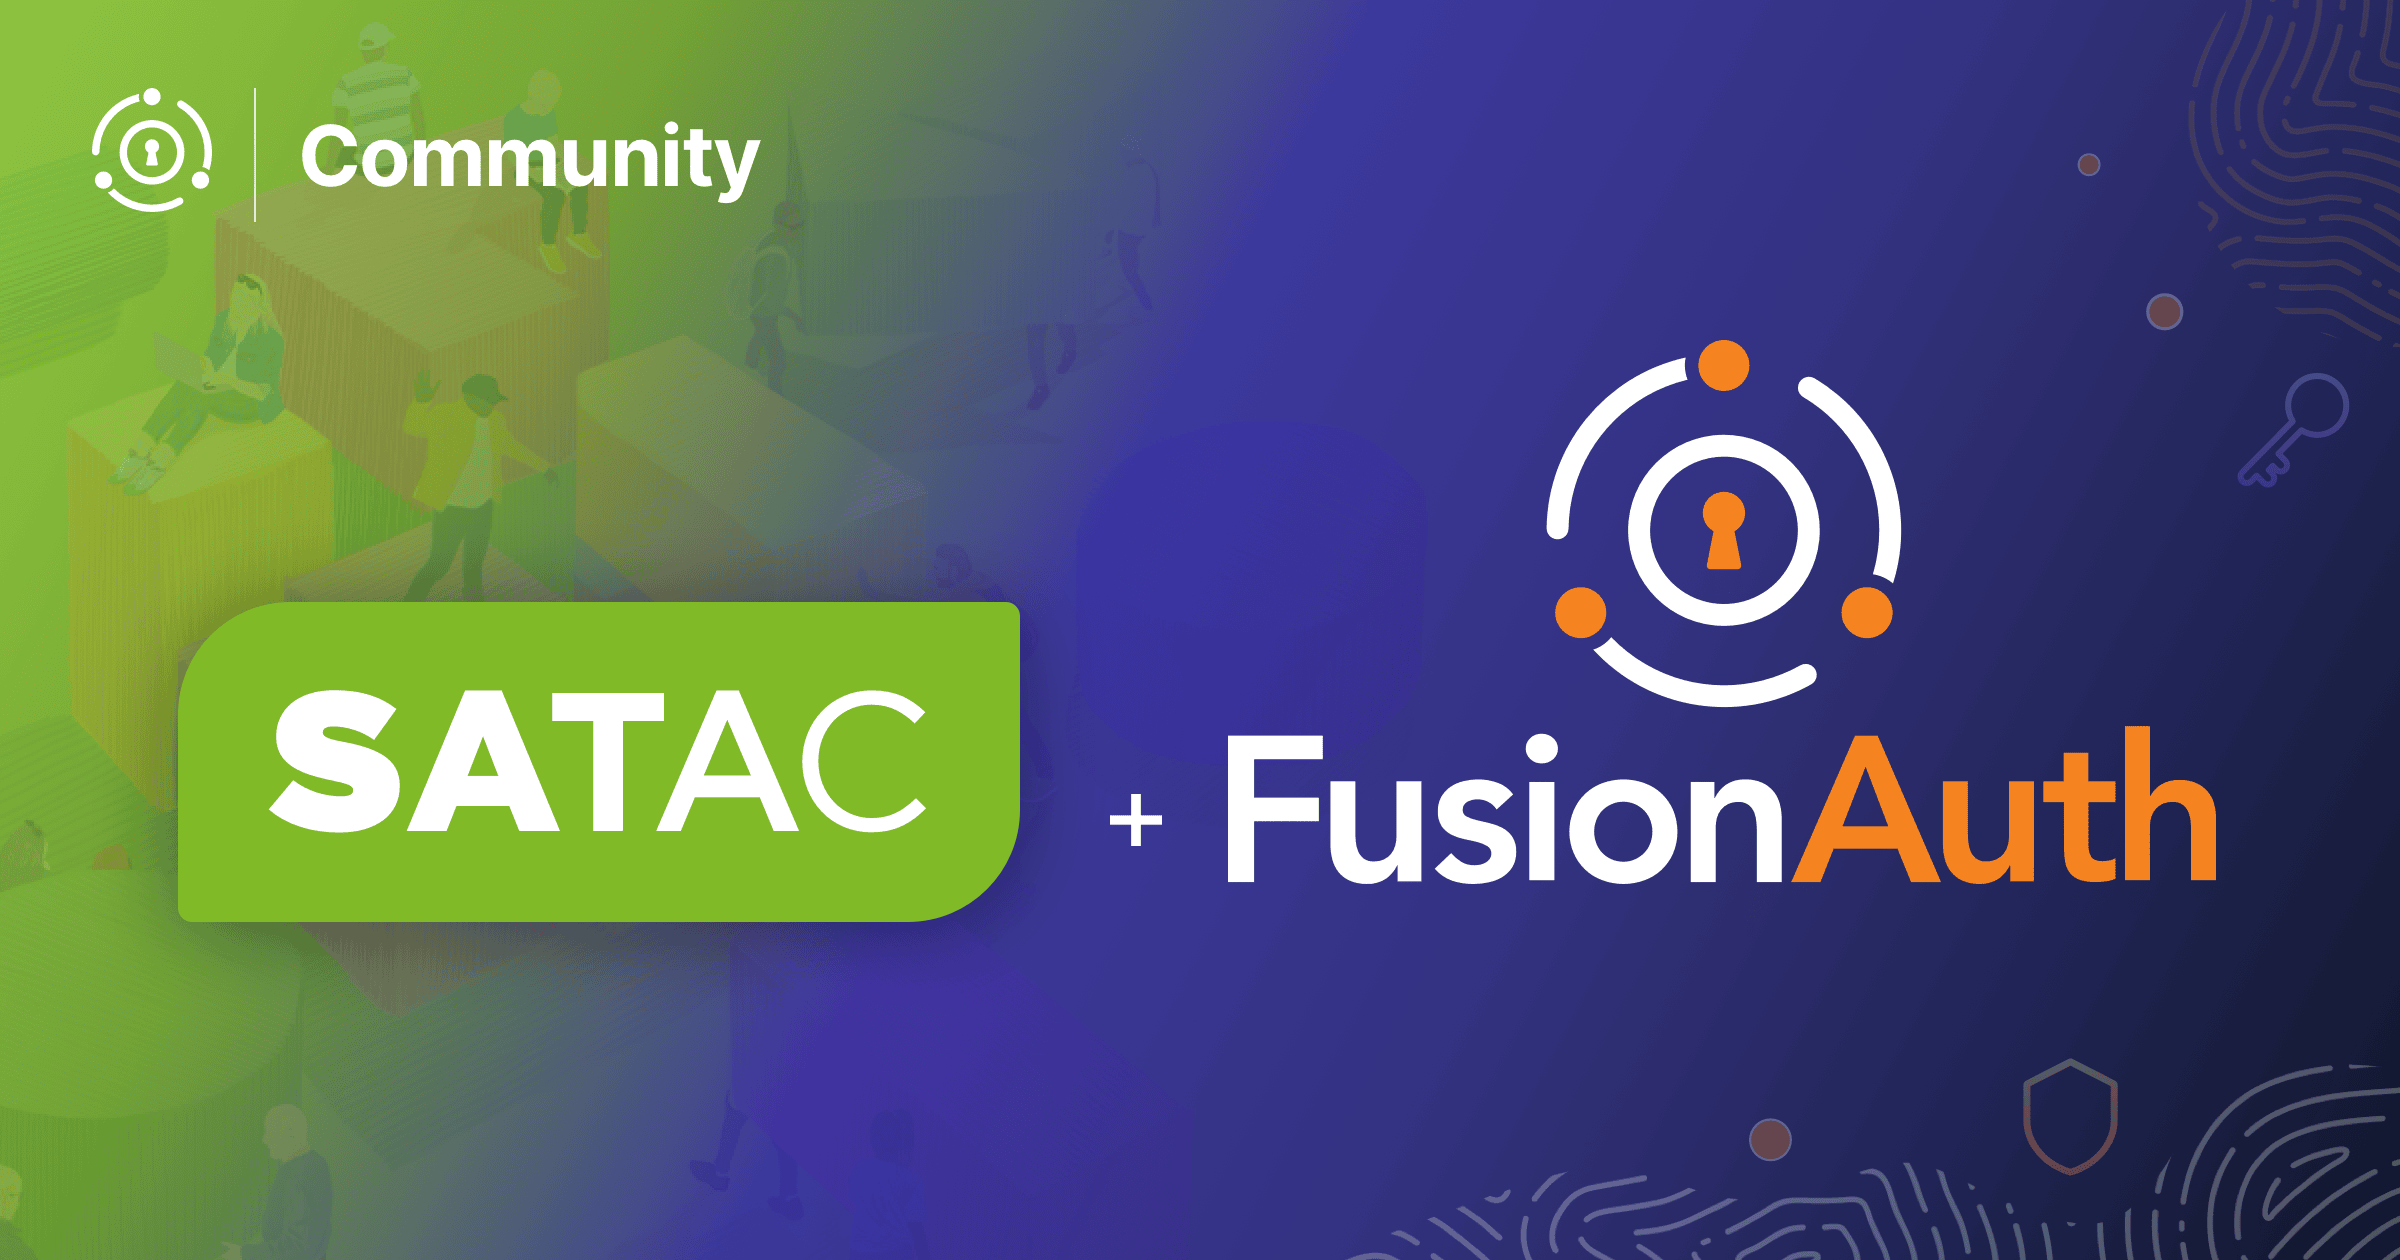 How SATAC Uses FusionAuth To Improve Applicants' Experience